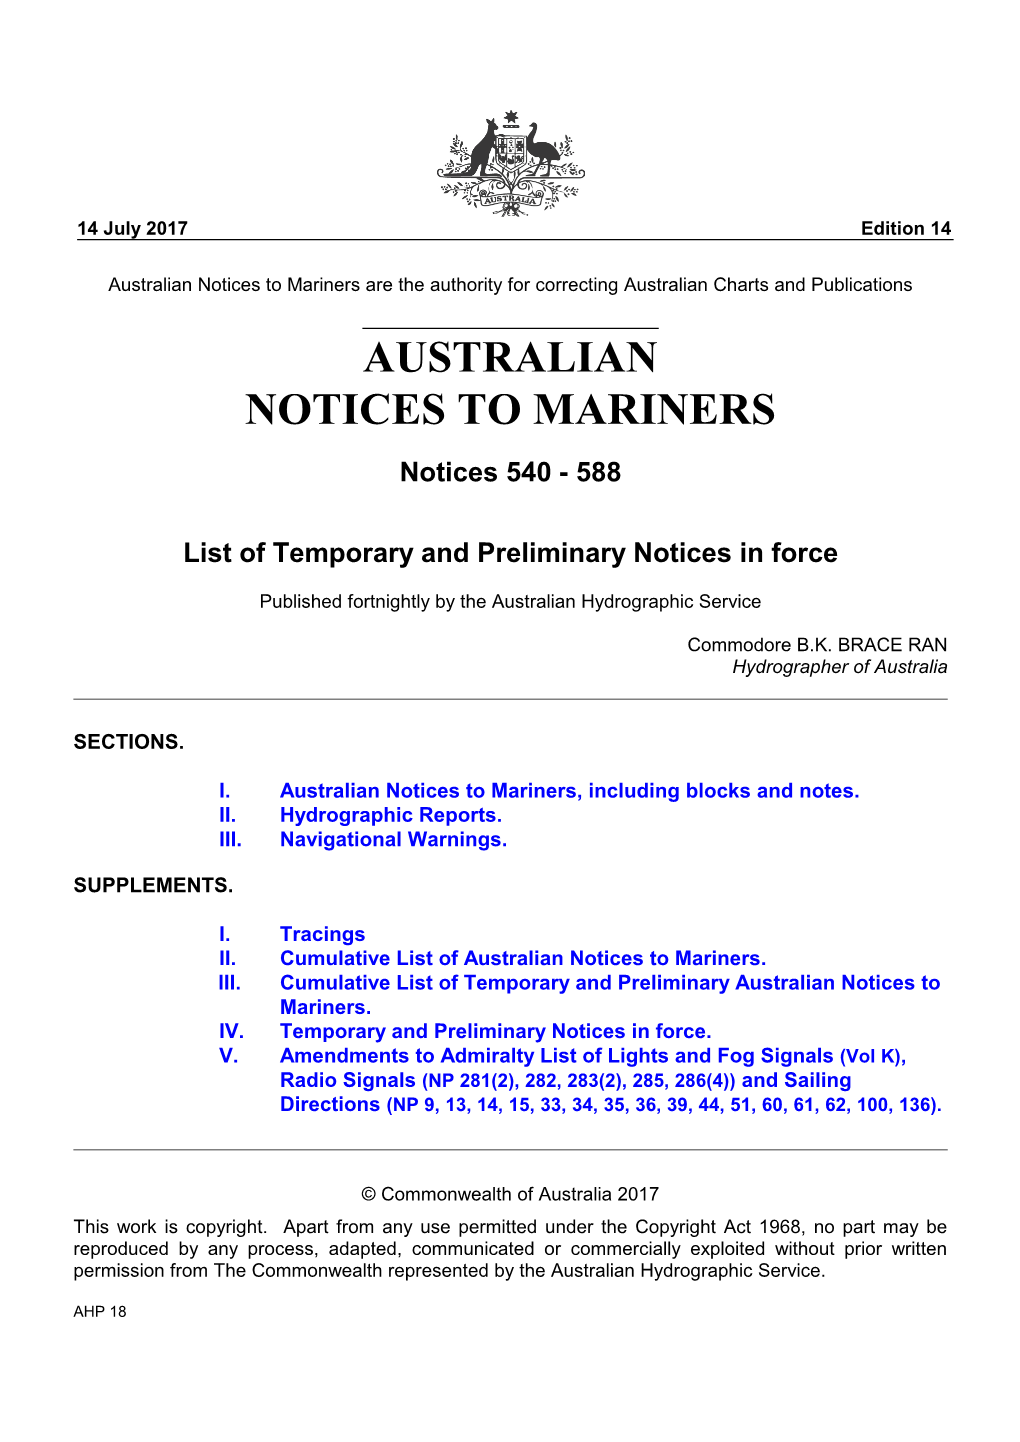 Australian Notices to Mariners Are the Authority for Correcting Australian Charts and Publications AUSTRALIAN NOTICES to MARINERS Notices 540 - 588